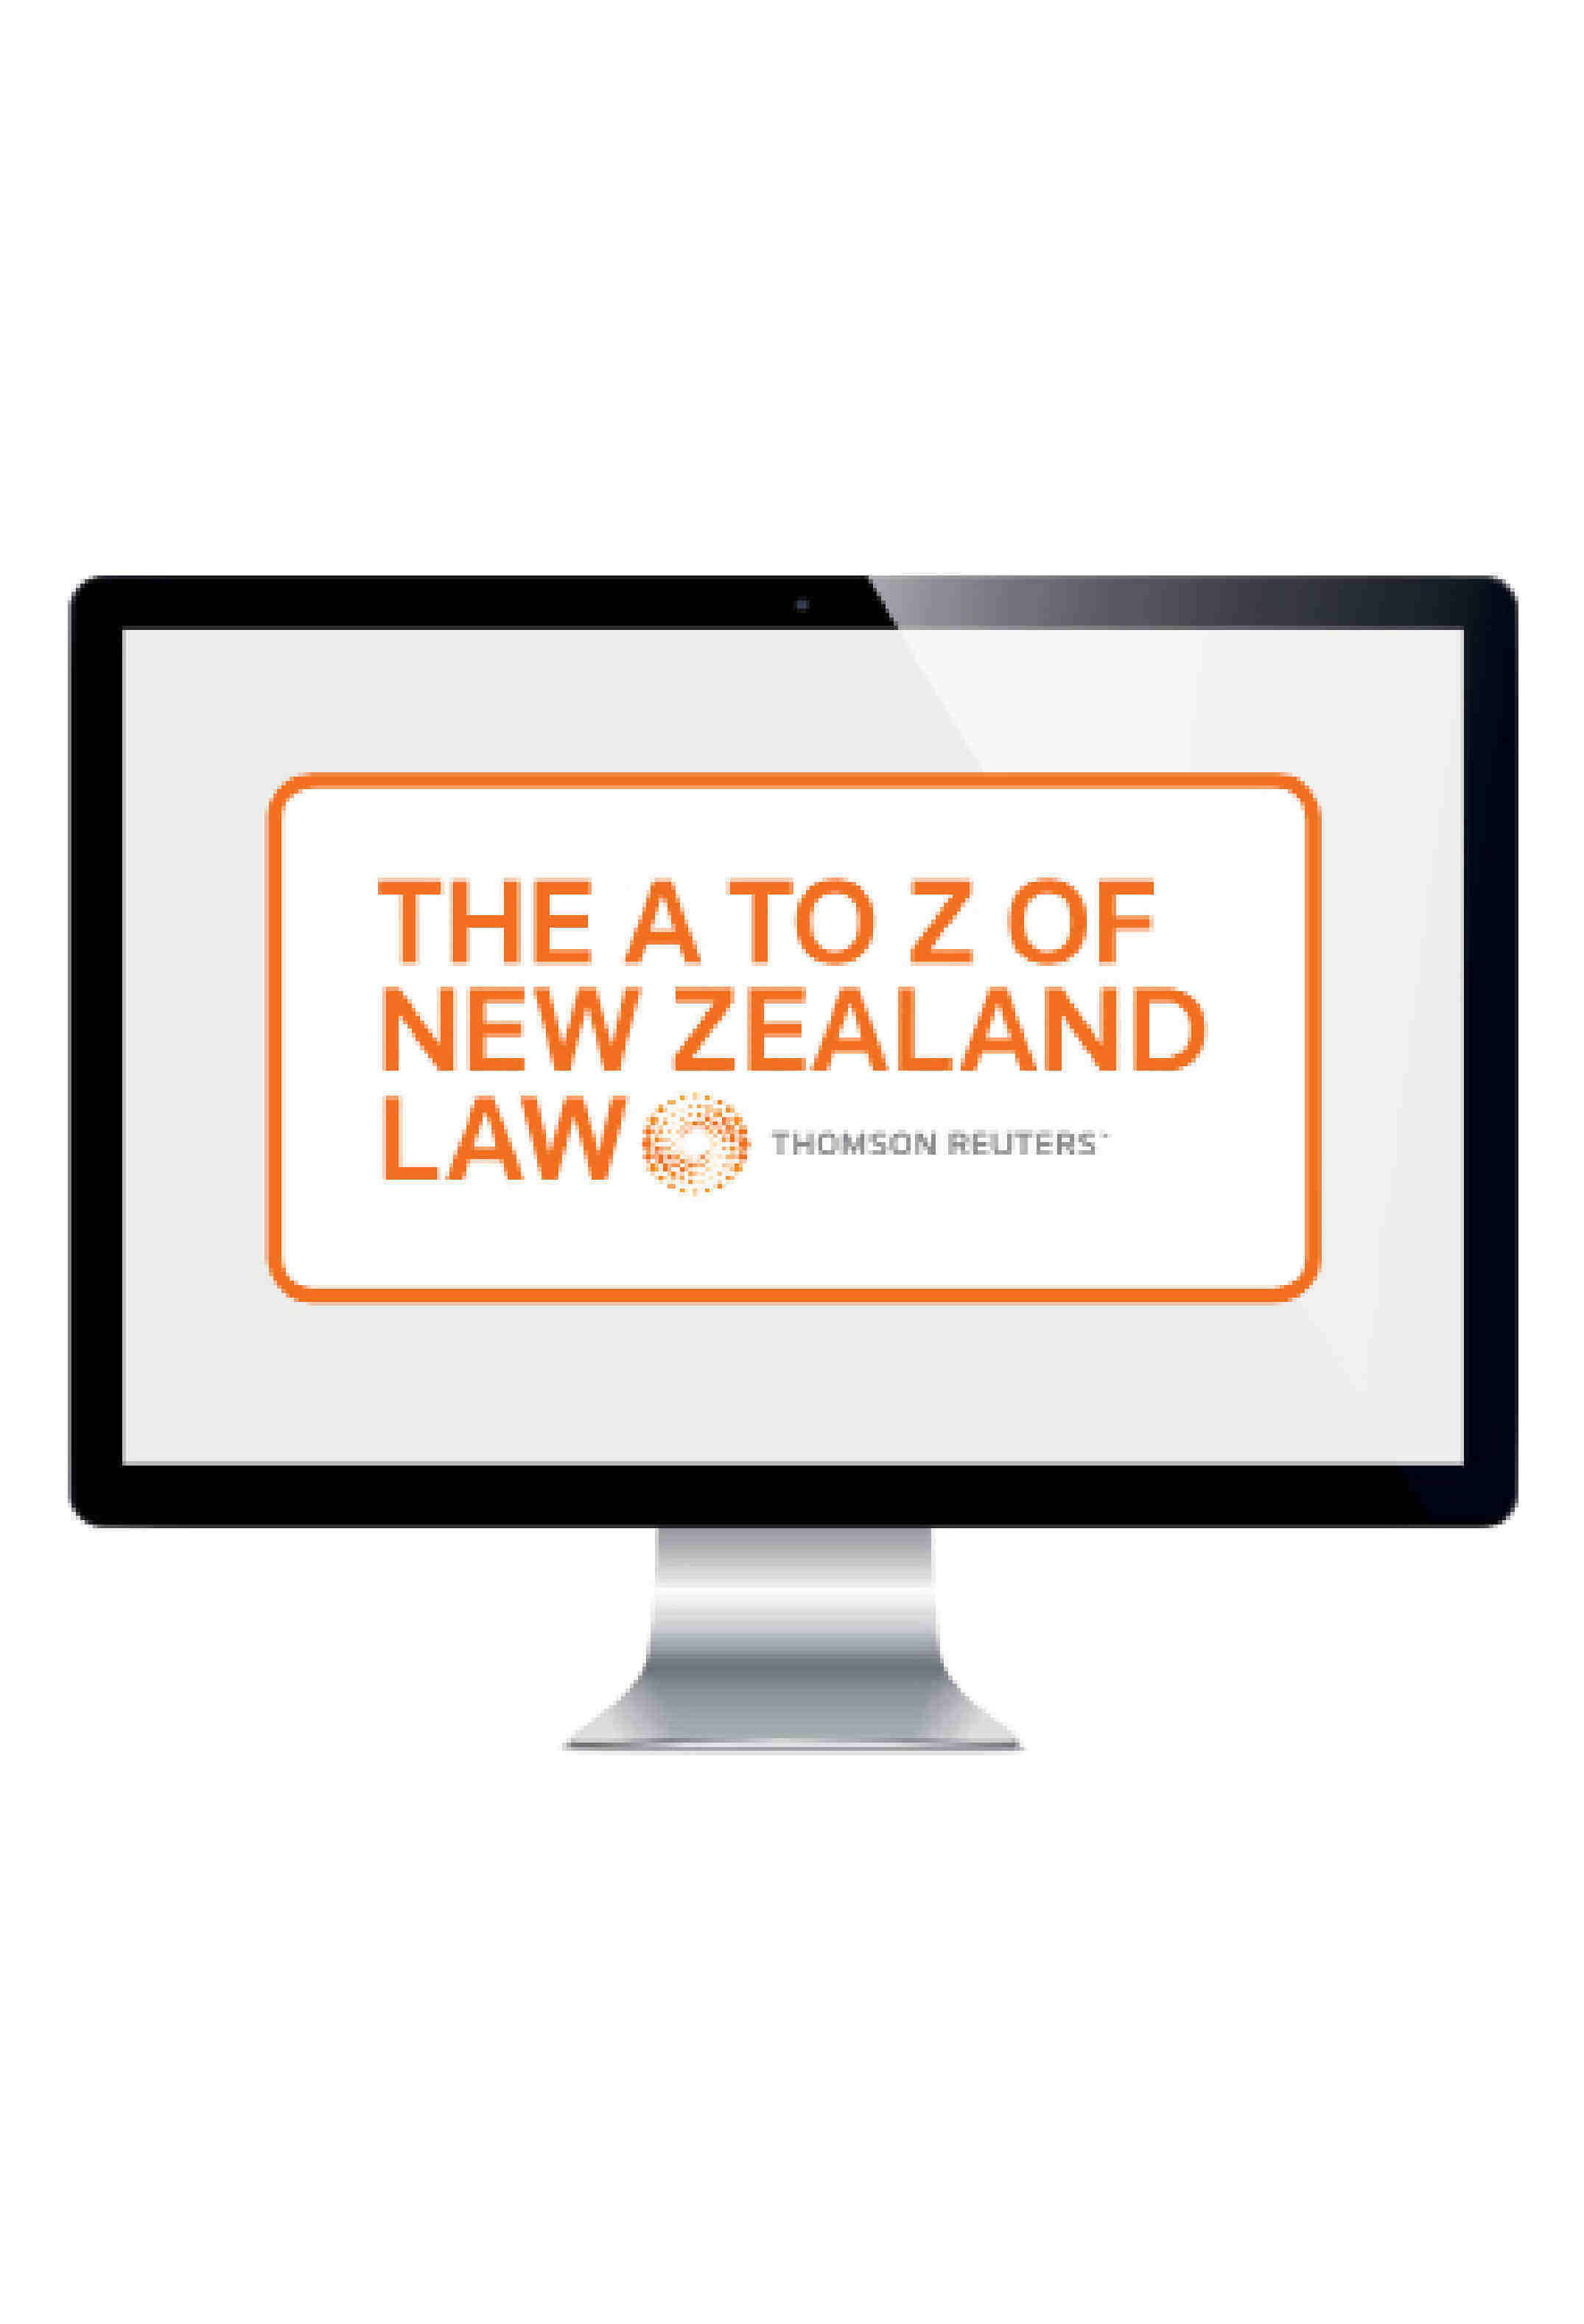 A to Z of NZ Law - Accident Compensation - Westlaw NZ